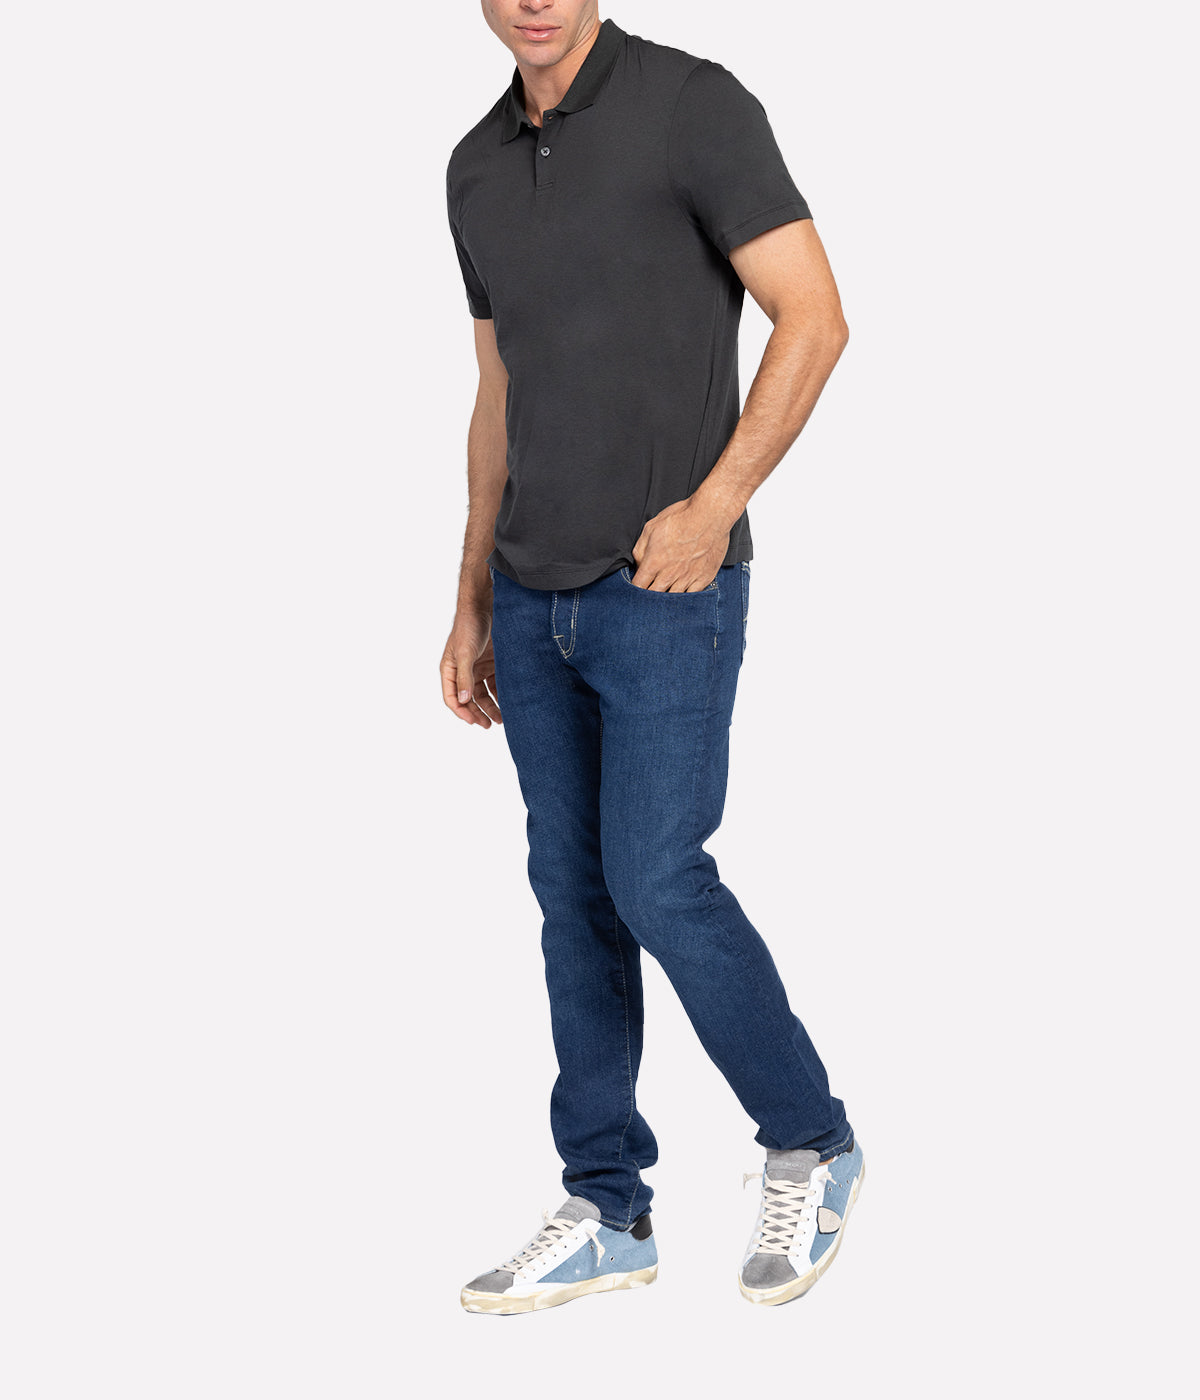 An on model shot showing the relaxed fit of the Luxe Lotus Jersey Polo. Polished carbon top made of lightweight, comfortable fabric. A James Perse staple you must have in your closet.